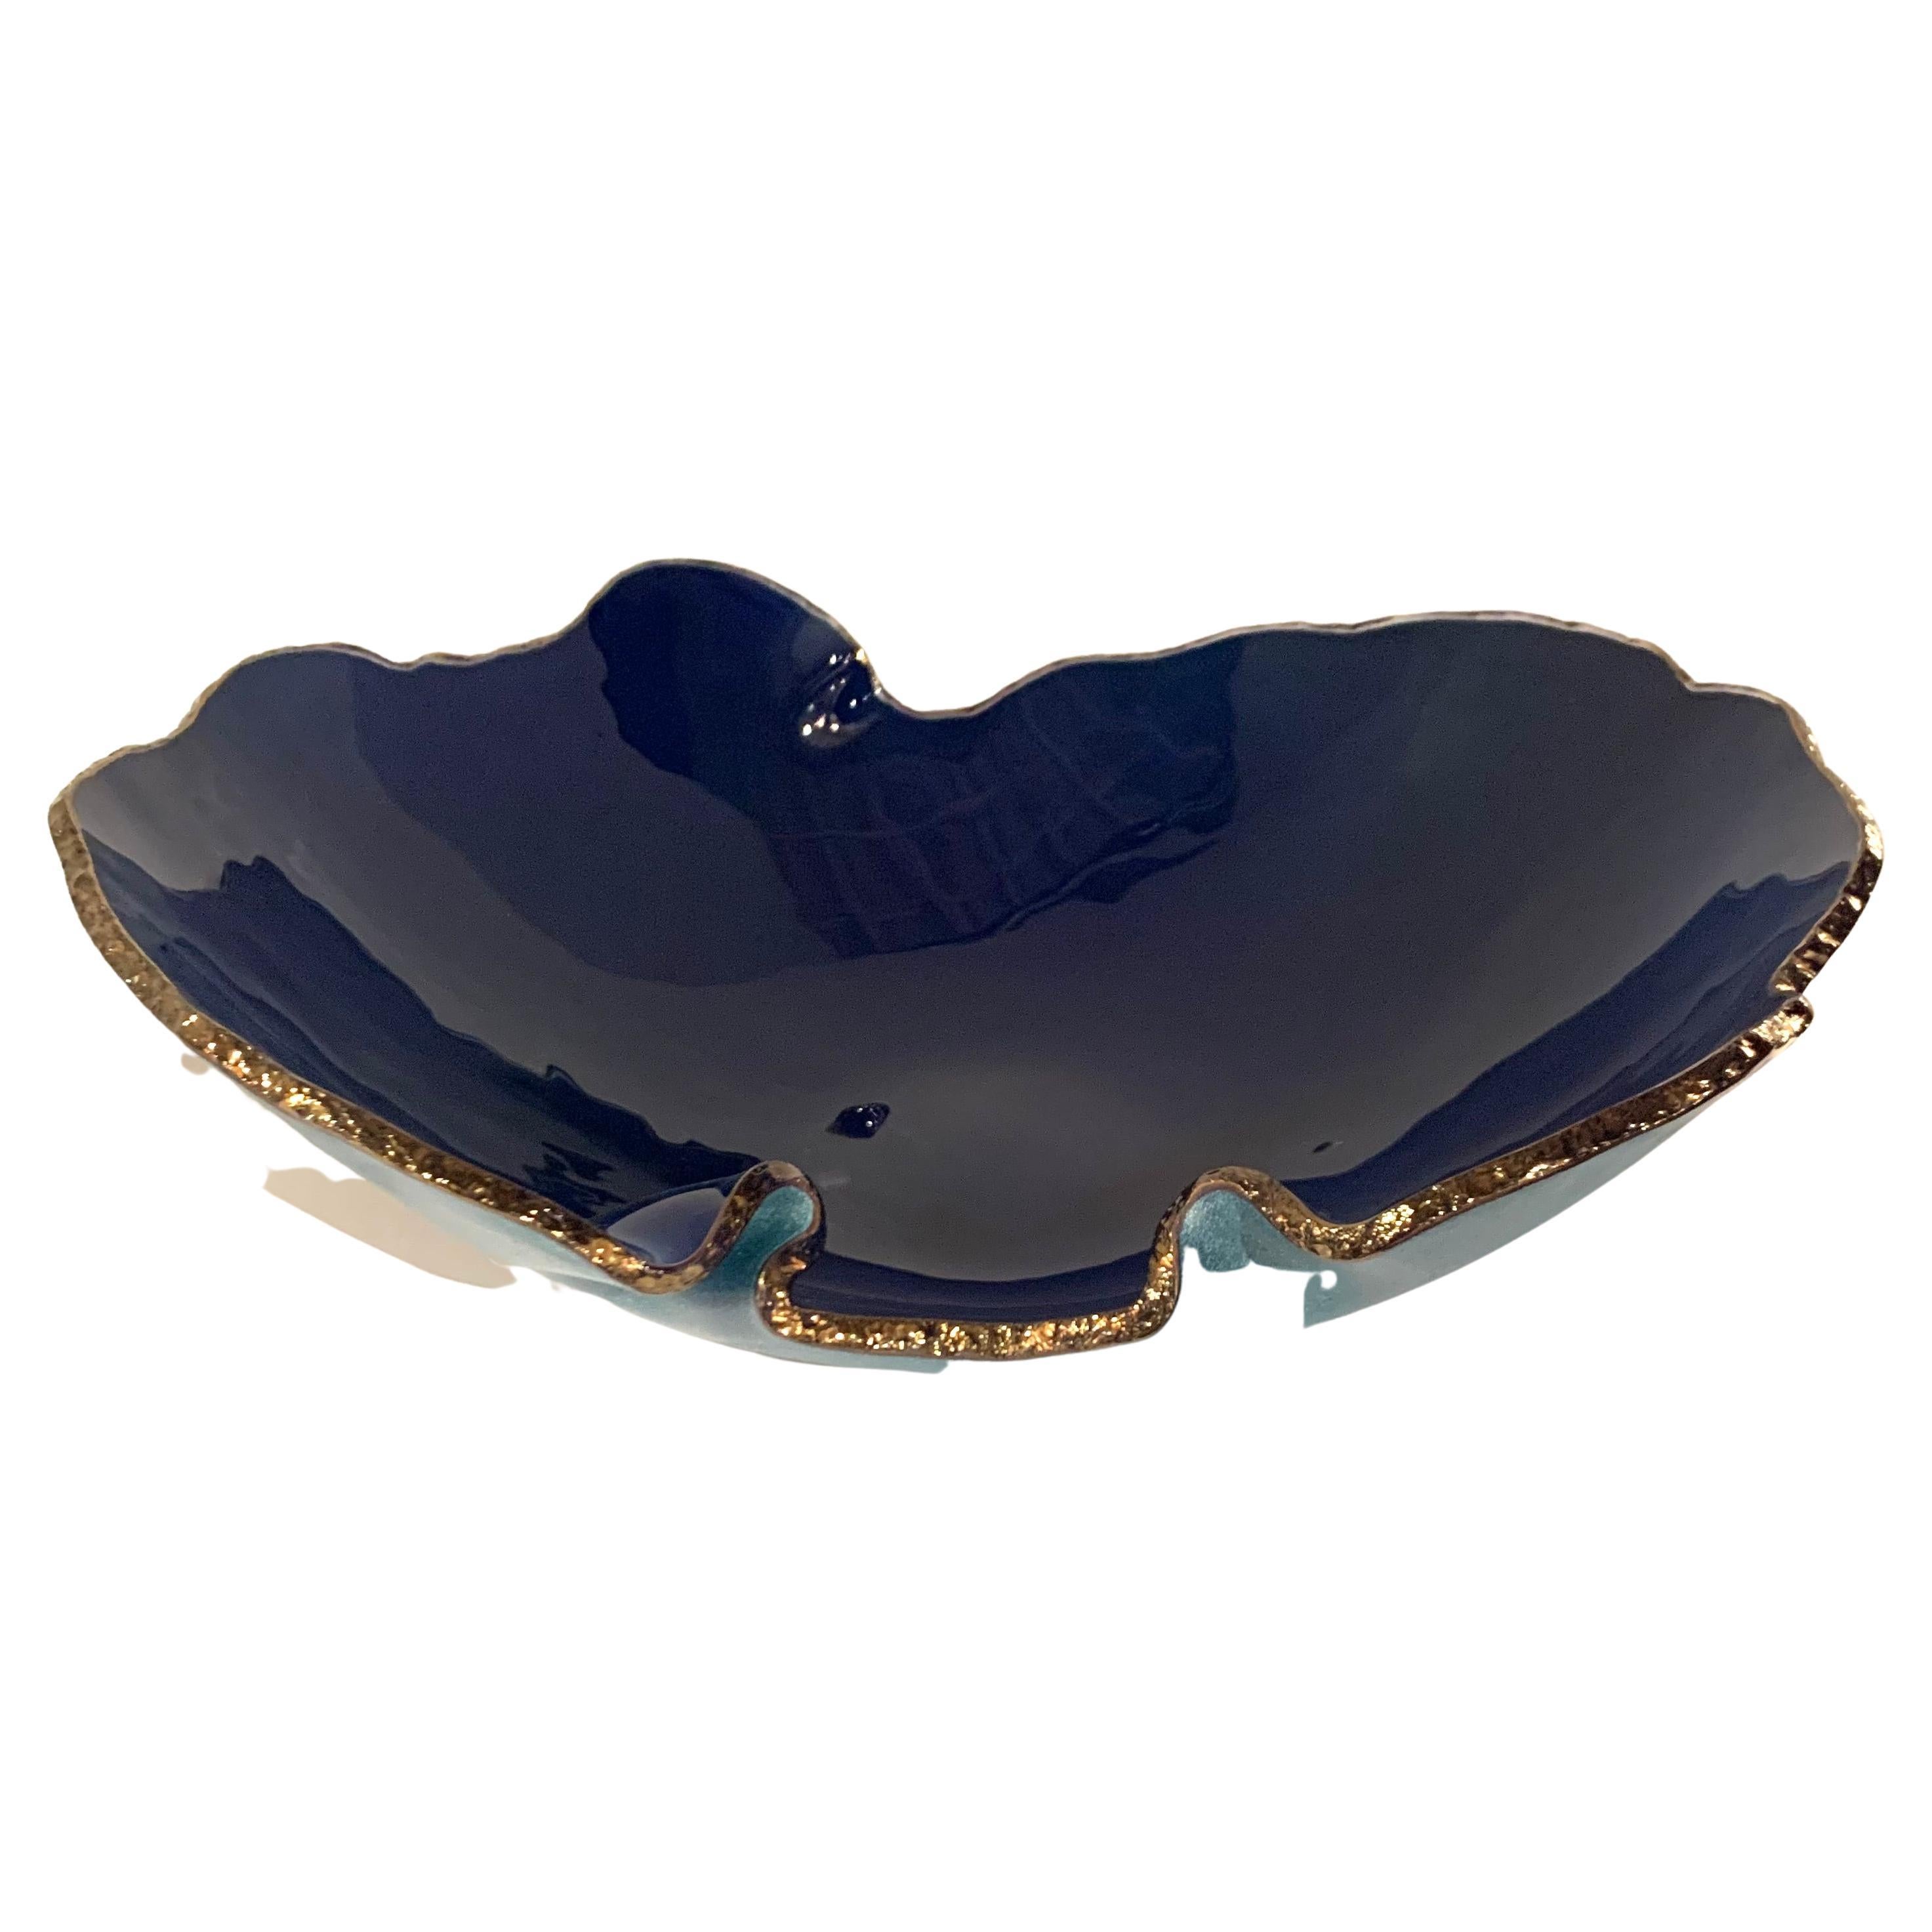 Contemporary Brazilian free form shaped glass bowl with royal blue interior
and washed blue exterior.
Decorative chiseled edge in gold.
One of several pieces from a collection of Brazilian designed glass objects.